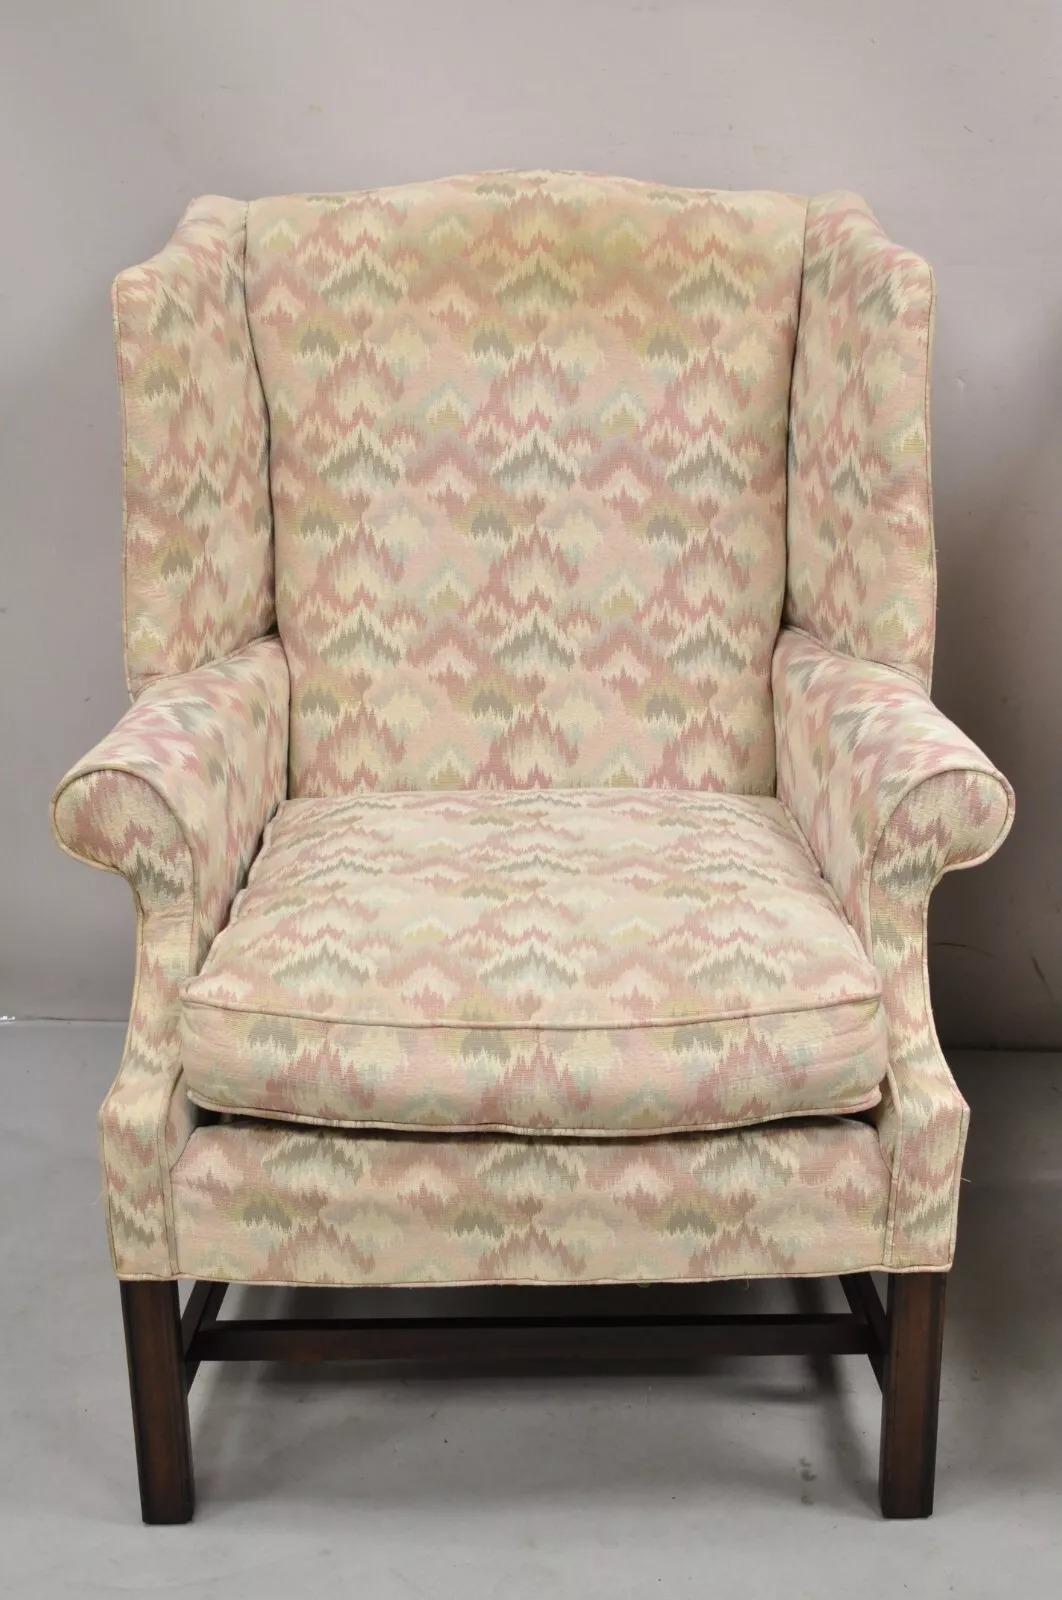 Frederick Edward Georgian Style Upholstered Wingback Lounge Arm Chairs - a Pair For Sale 1